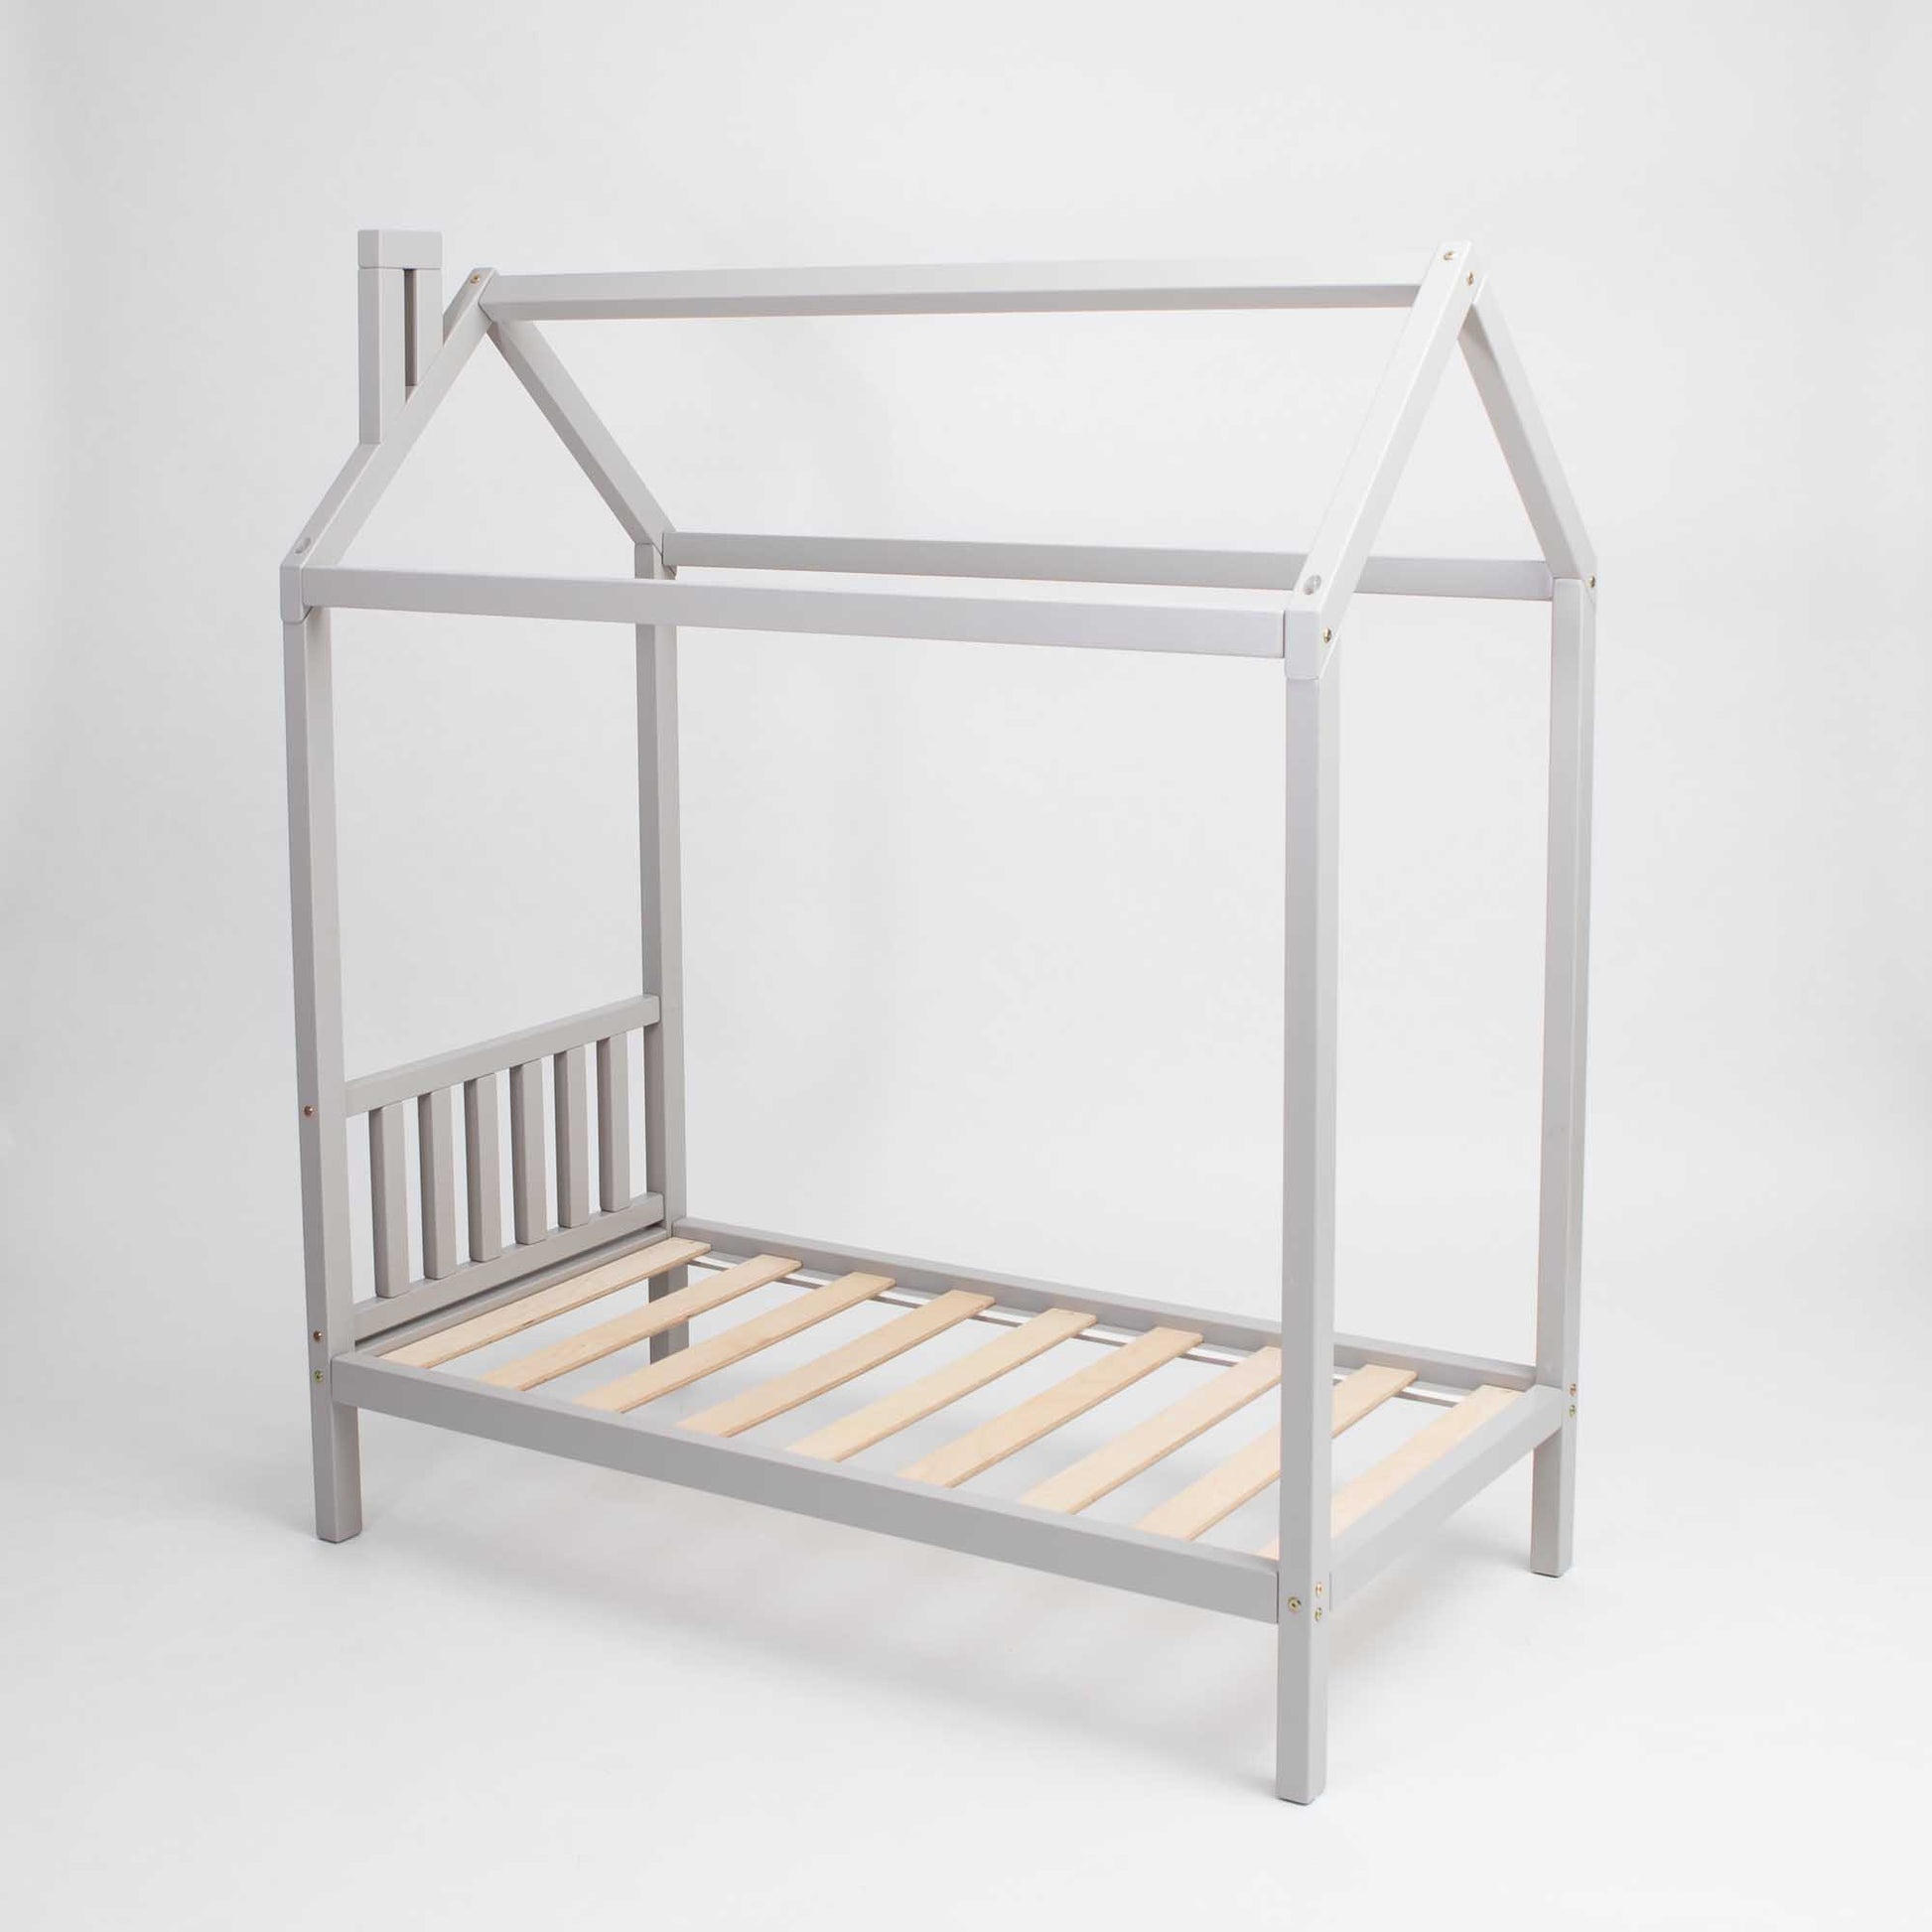 A Toddlers' house bed on legs with a headboard with a grey frame and wooden slats.